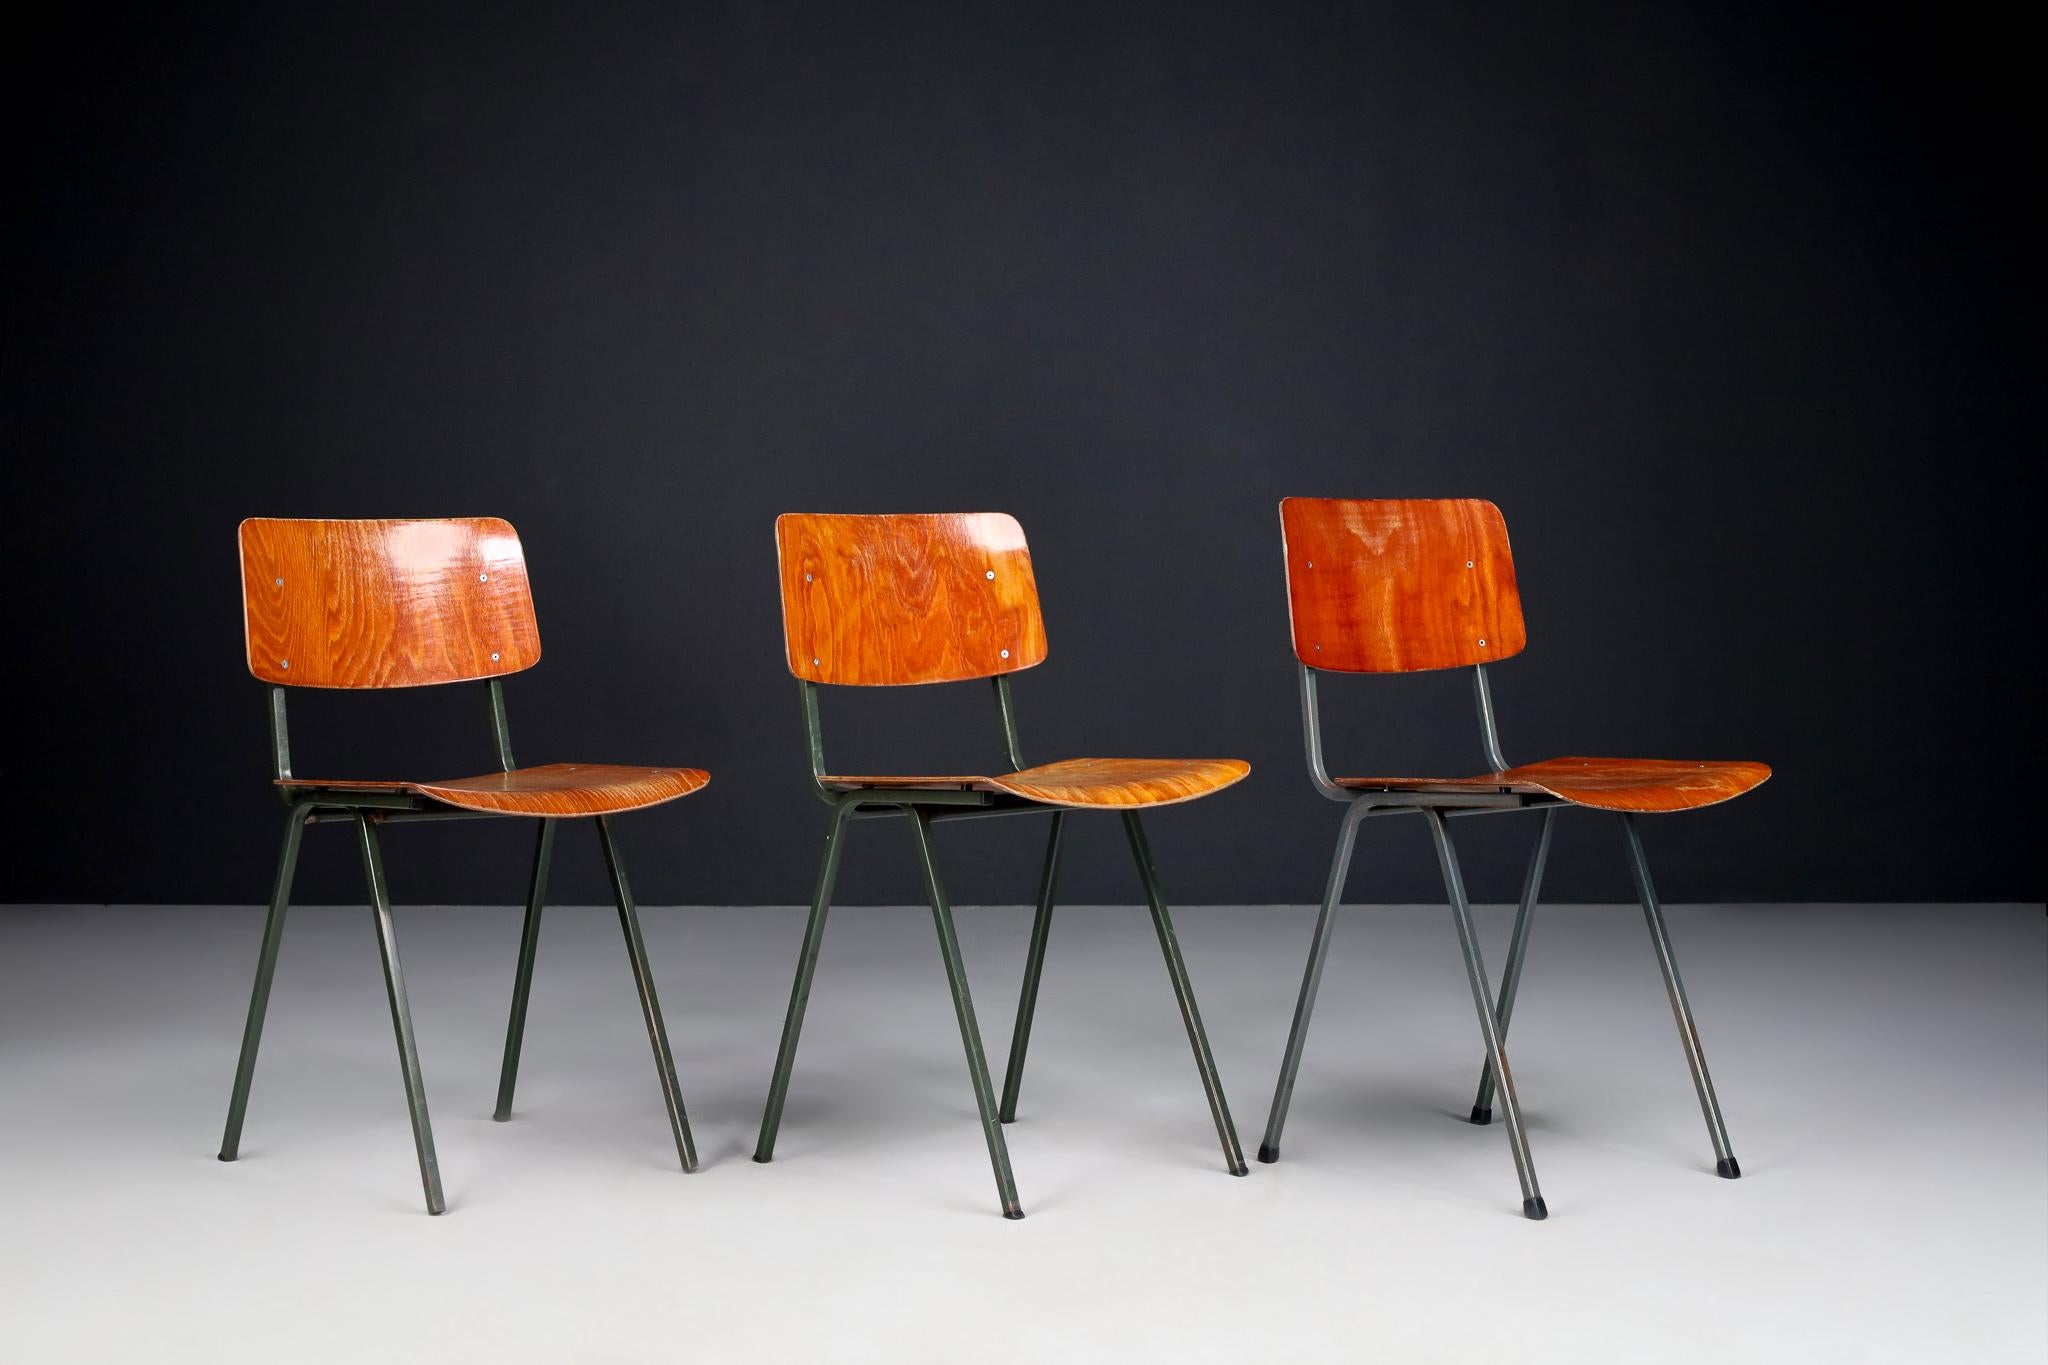 A large set of Marko Holland chairs, The Netherlands 1960s

Unique and comfy industrial vintage plywood school chairs consisting of 40 chairs, produced by Marko Holland in the ’60s. 
Made from a sheet steel frame with a fine laminated and formed